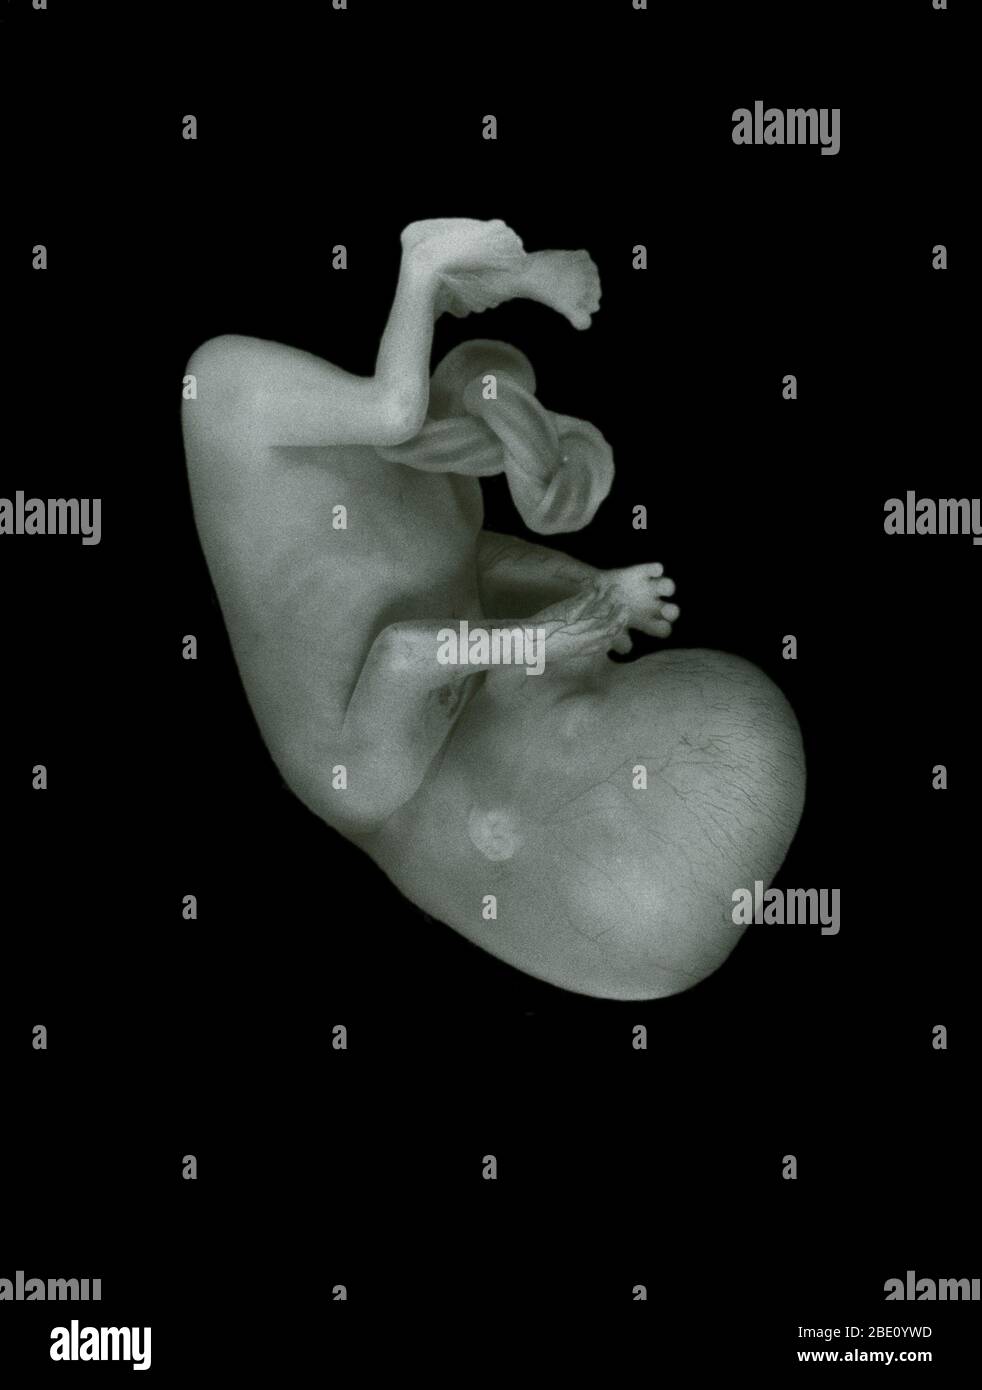 13 week old human fetus. During the thirteenth week, the intestines start migrating from the umbilical cord into the abdomen, the villi in the intestines are forming, and meconium (first stool) is developing. Stock Photo